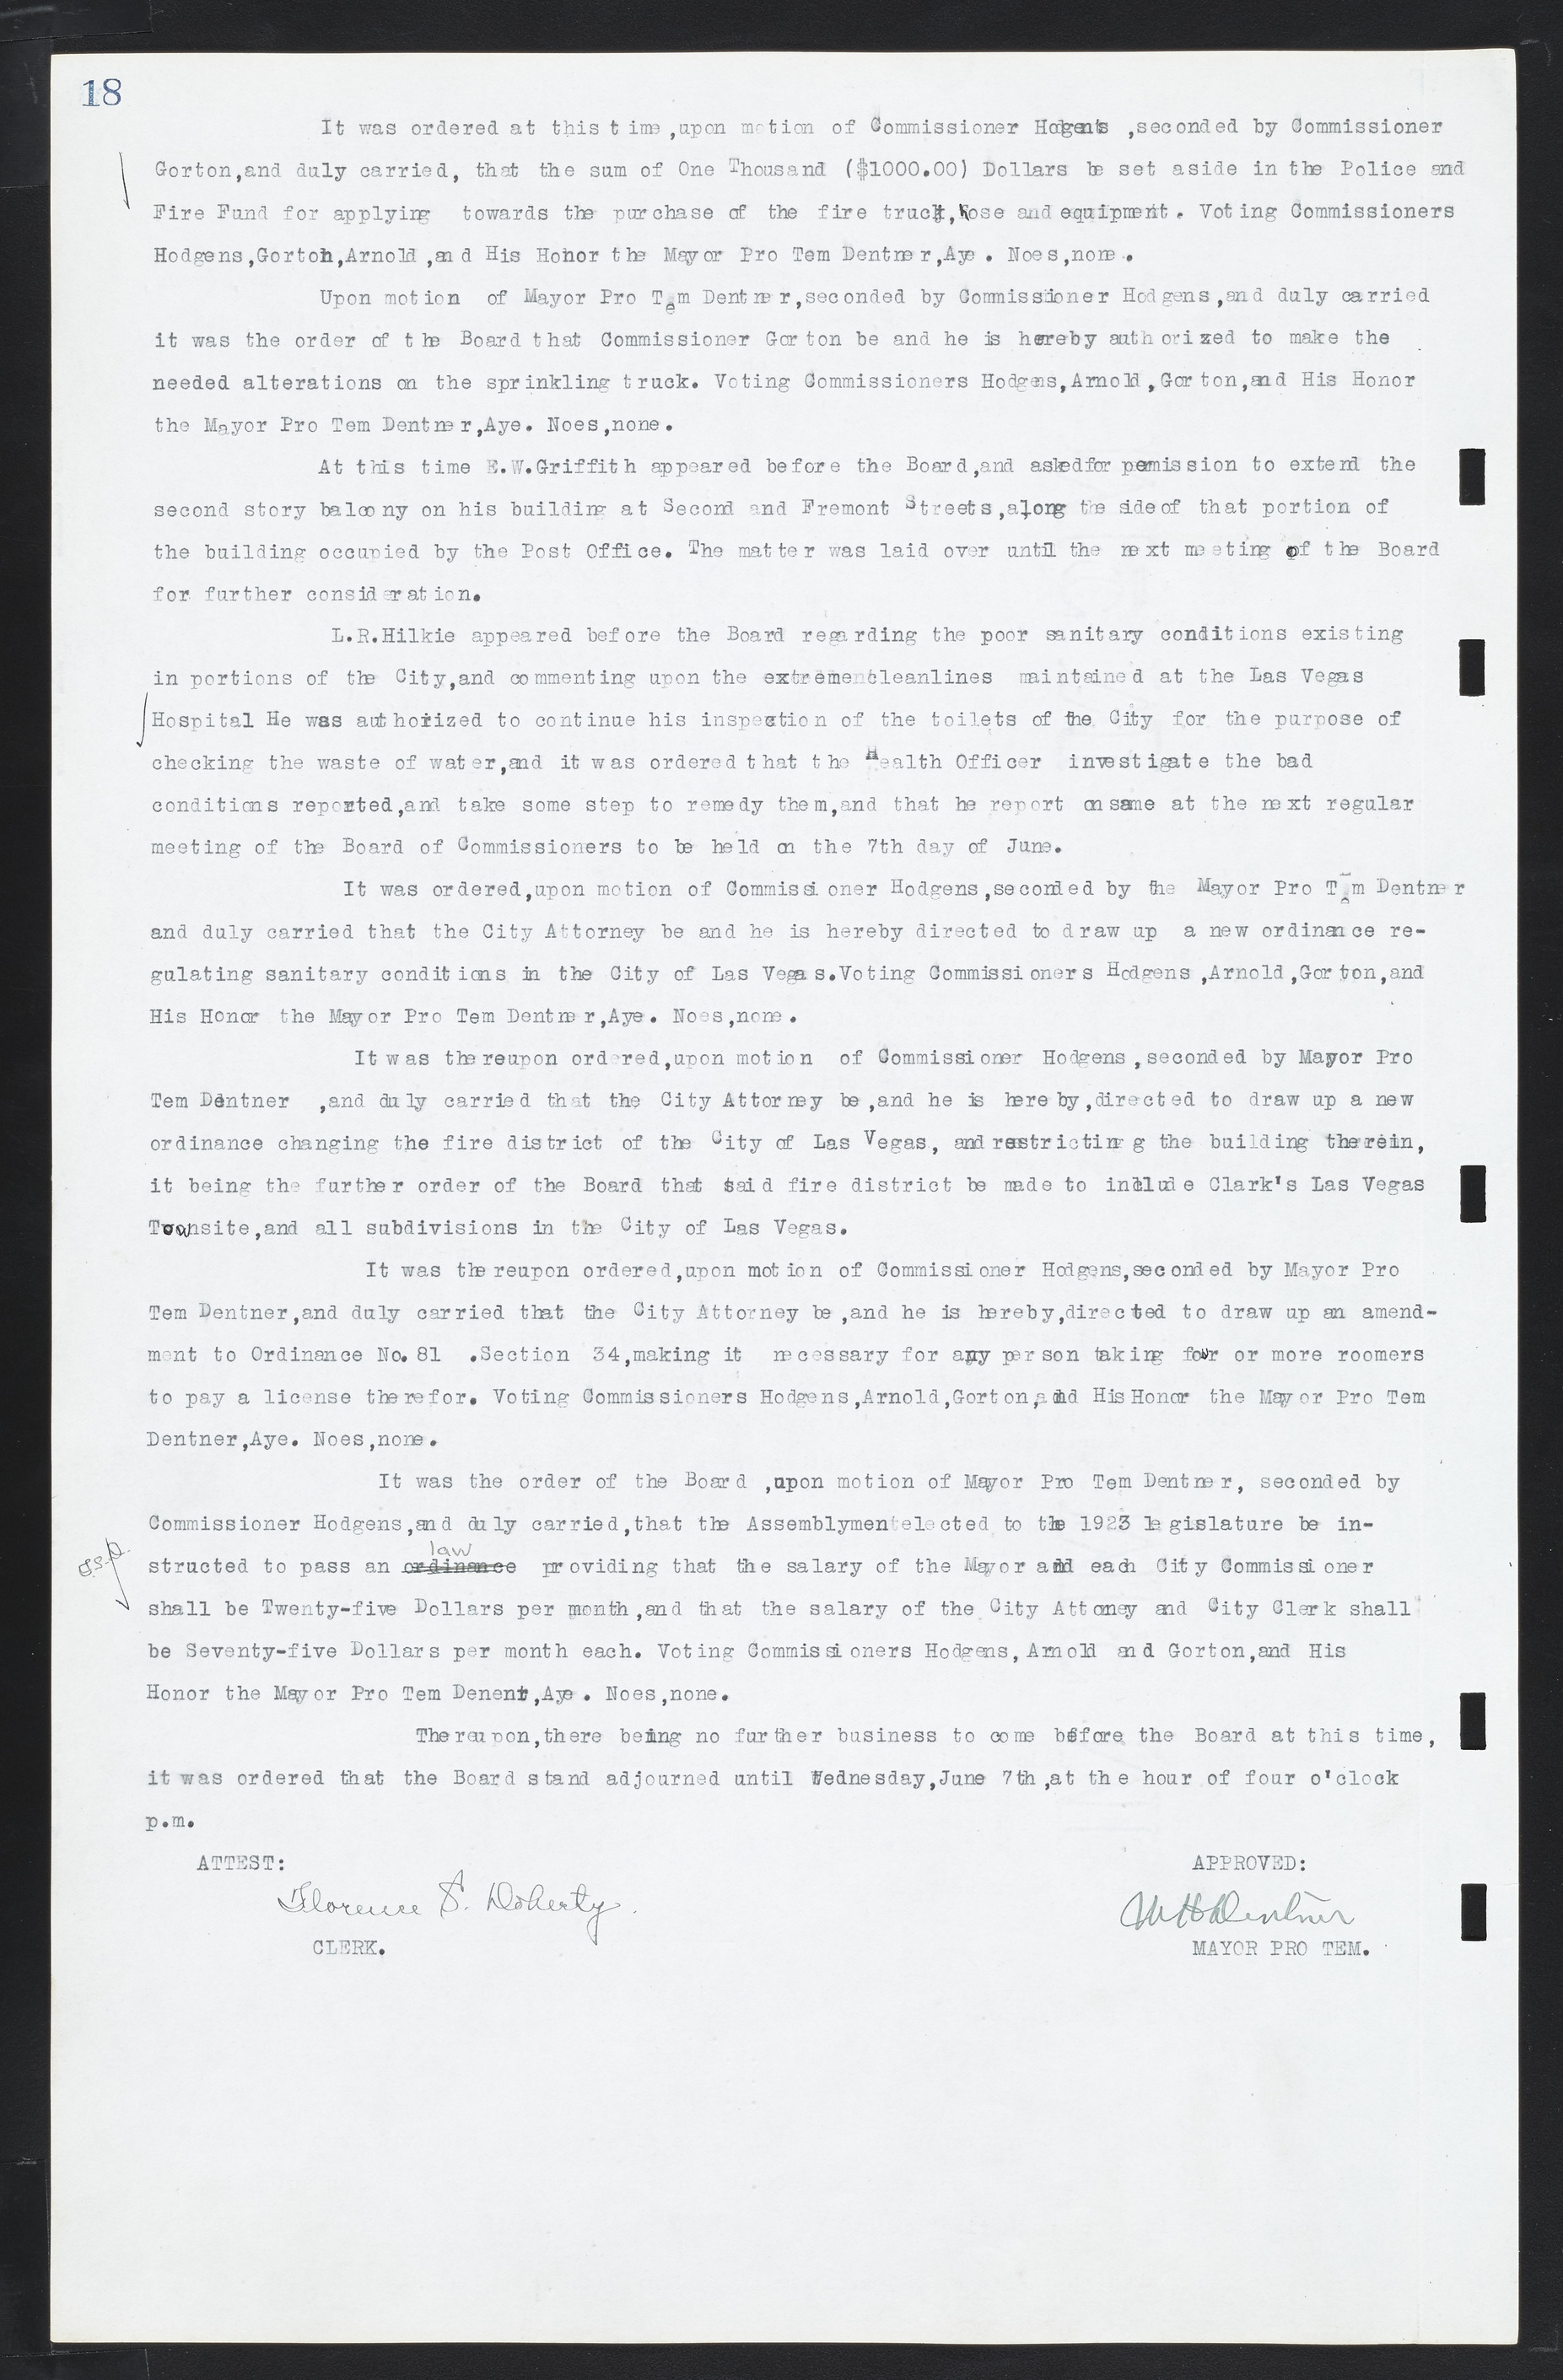 Las Vegas City Commission Minutes, March 1, 1922 to May 10, 1929, lvc000002-25